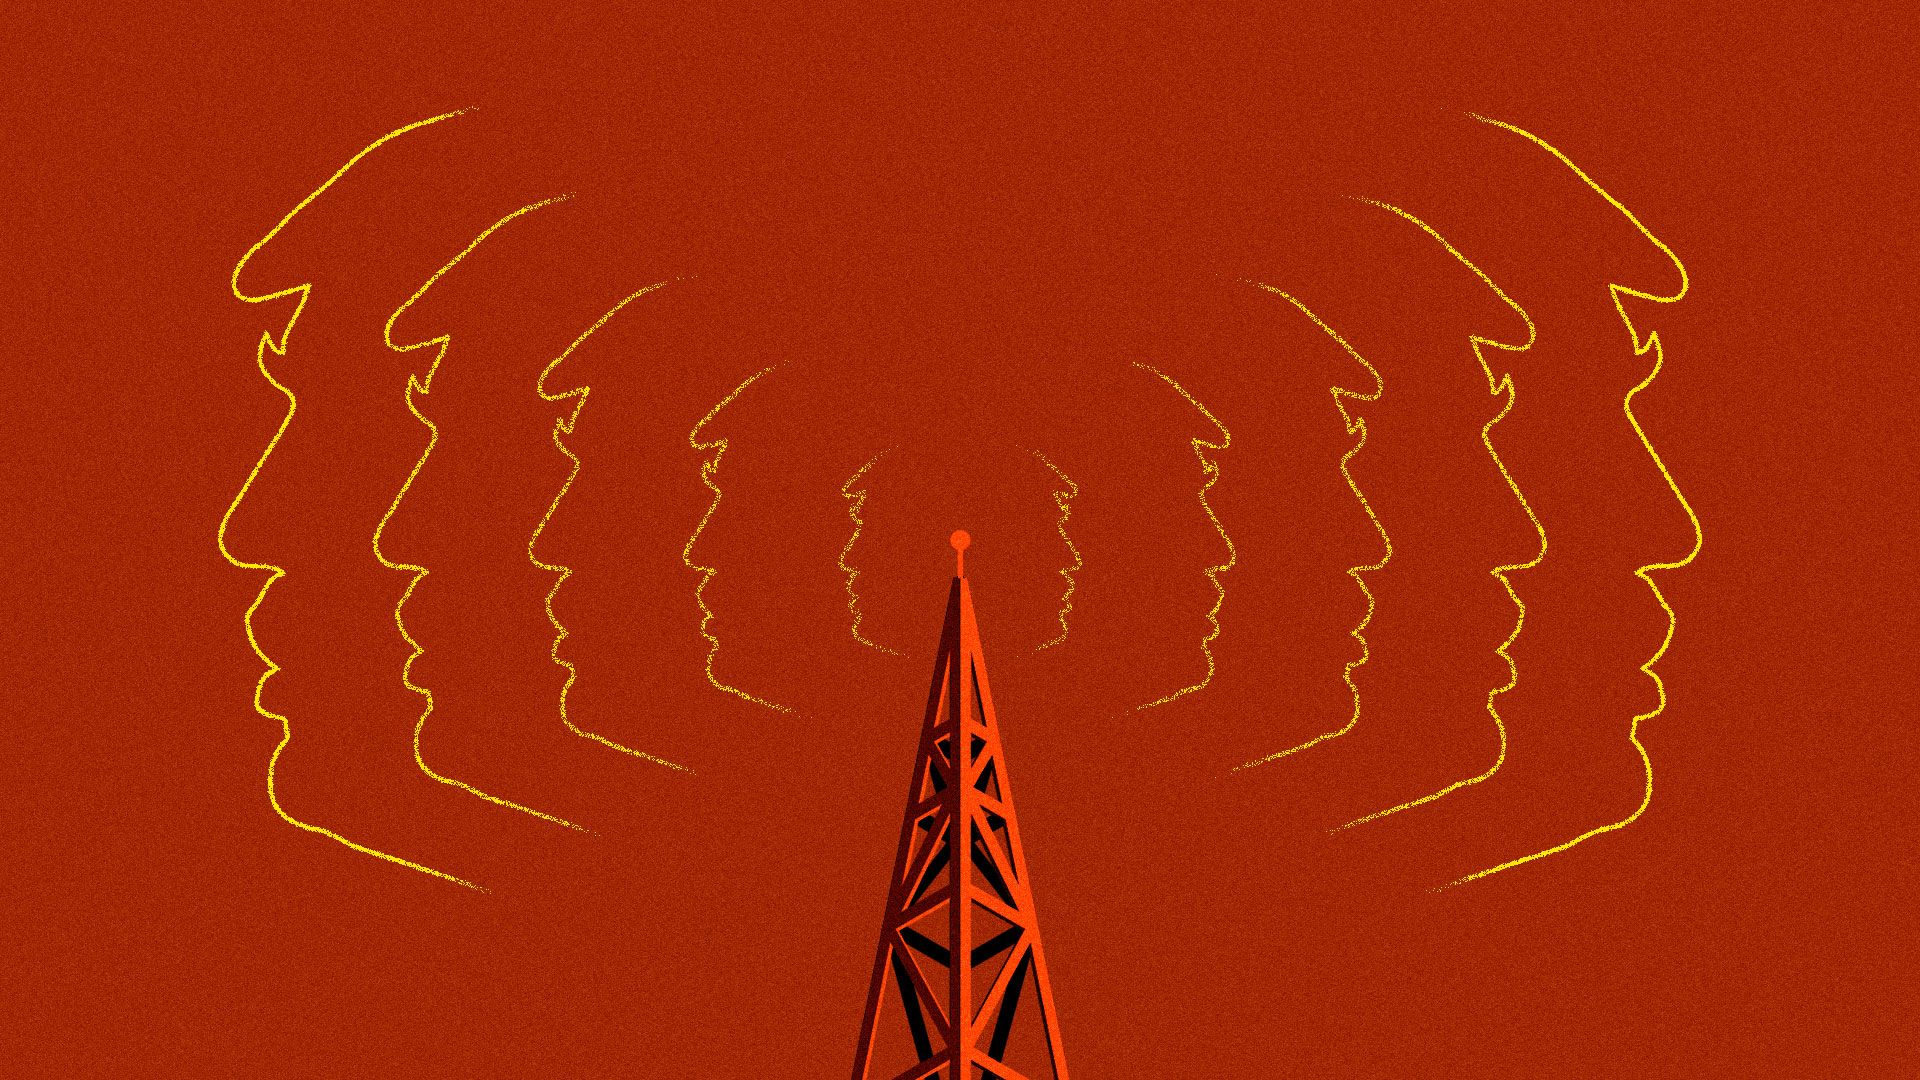 A radio tower emanating radio waves in the shape of Donald Trump's profile